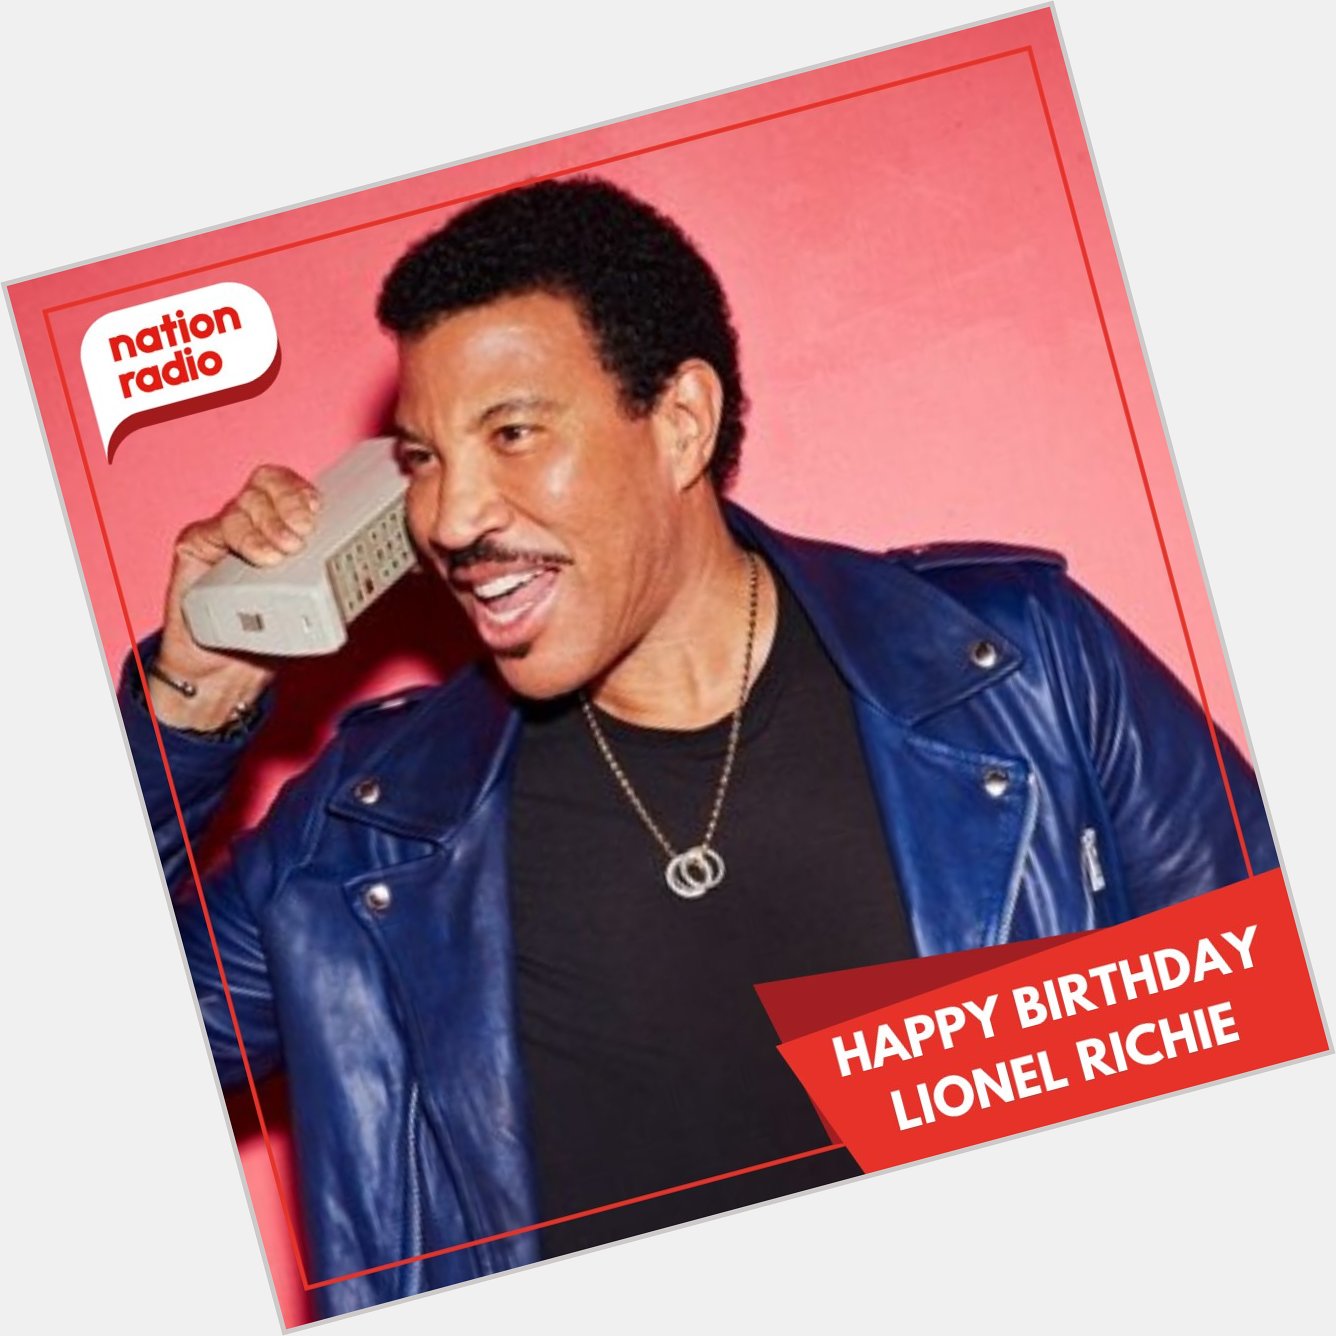 Happy 71st birthday to Lionel Richie! Can we all chip in to buy him a new phone? 